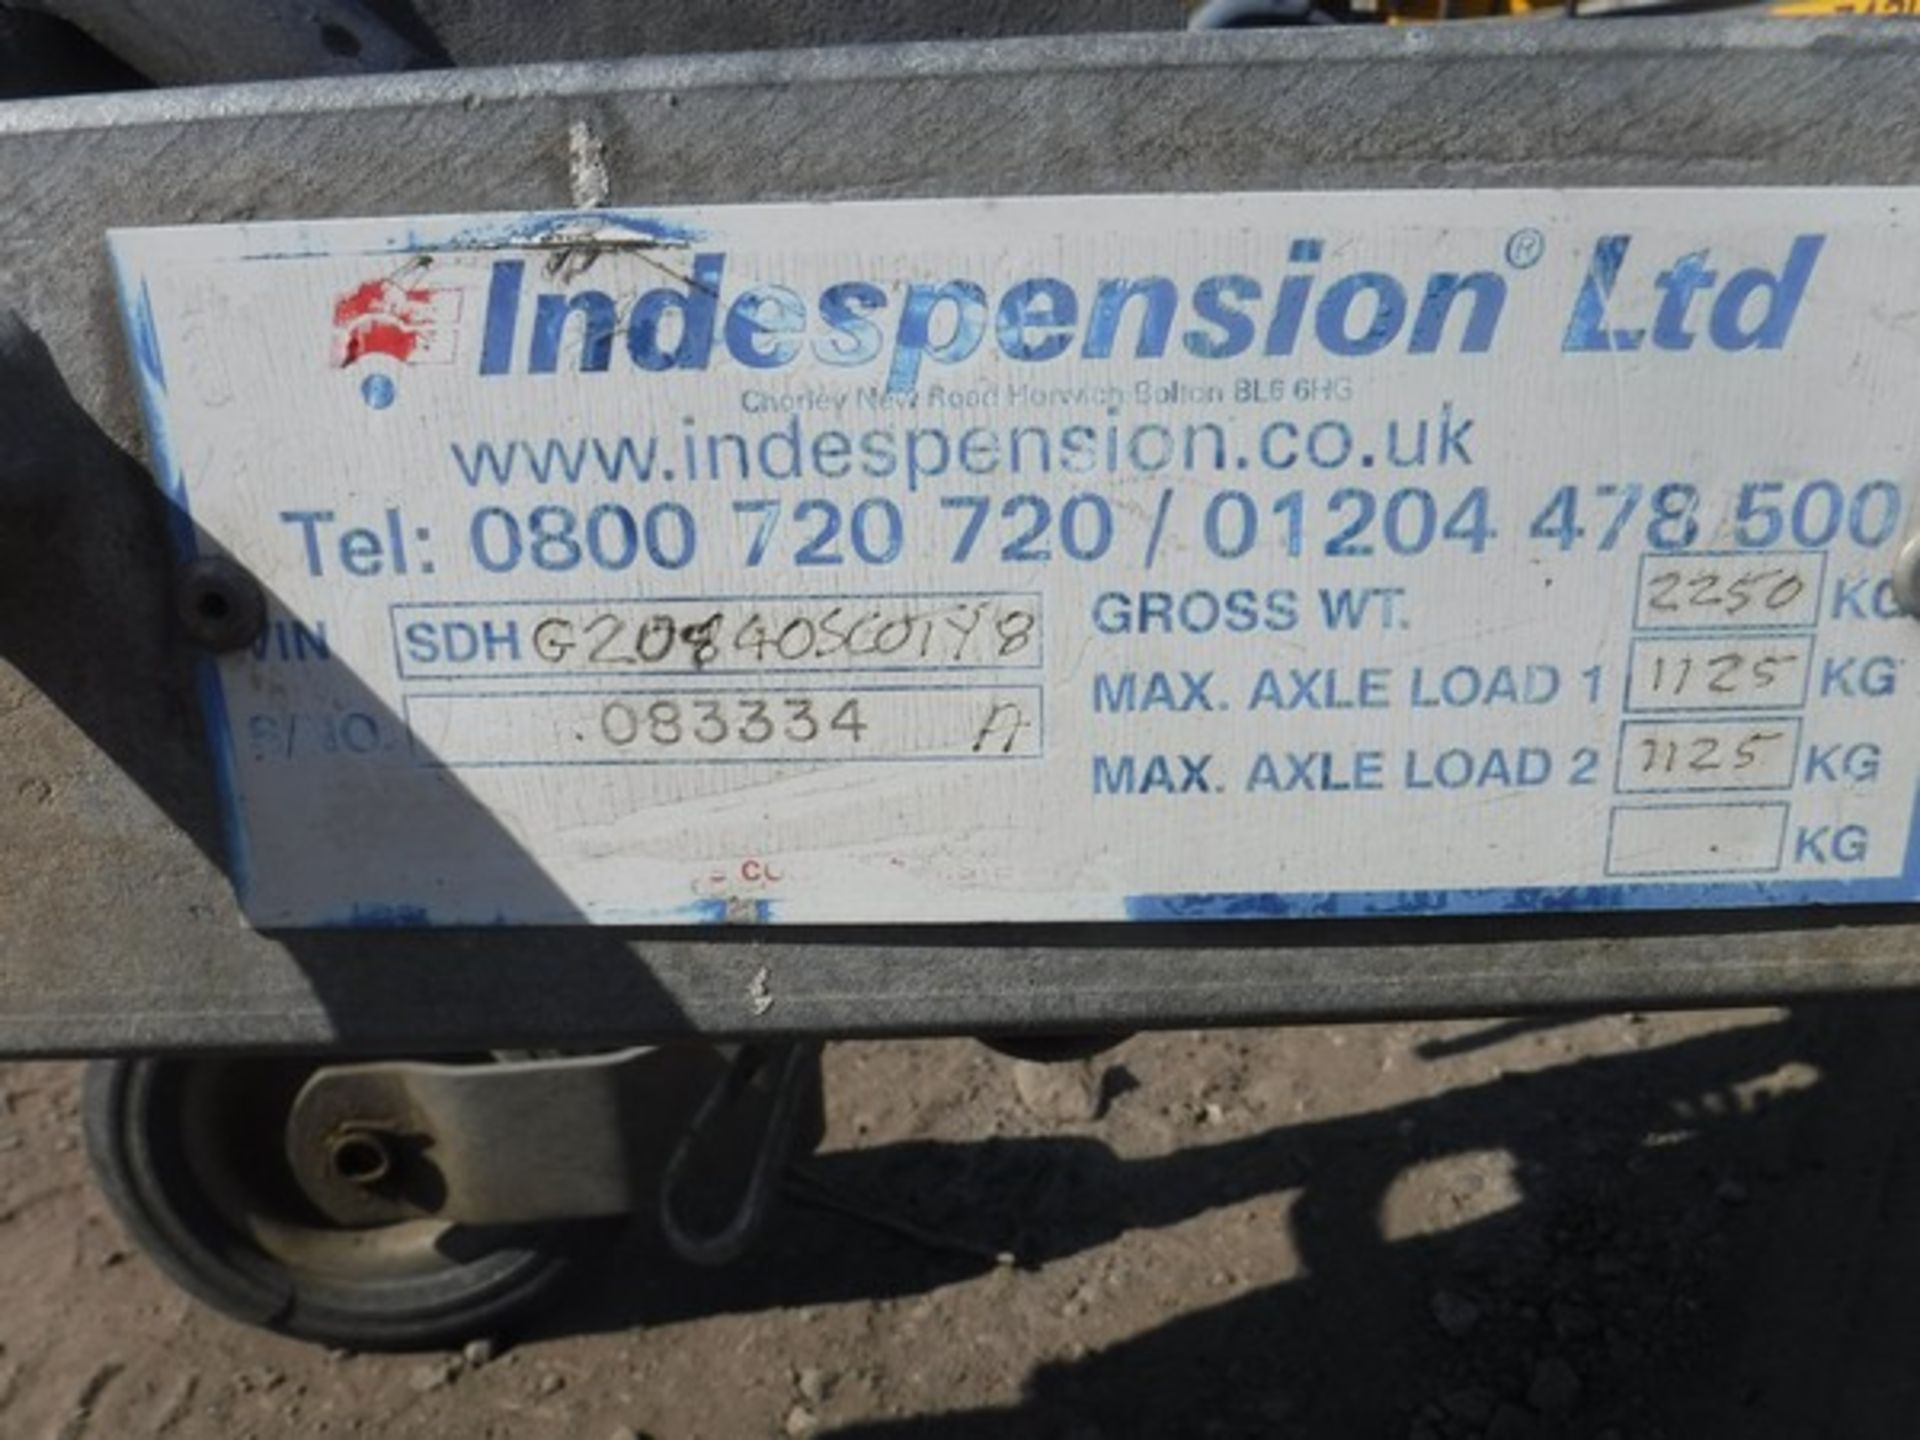 INDESPENSION 8ft x 4ft twin axle plant trailer with mesh ramp. S/N G20840550198. Asset no 758-8039 - Image 4 of 5